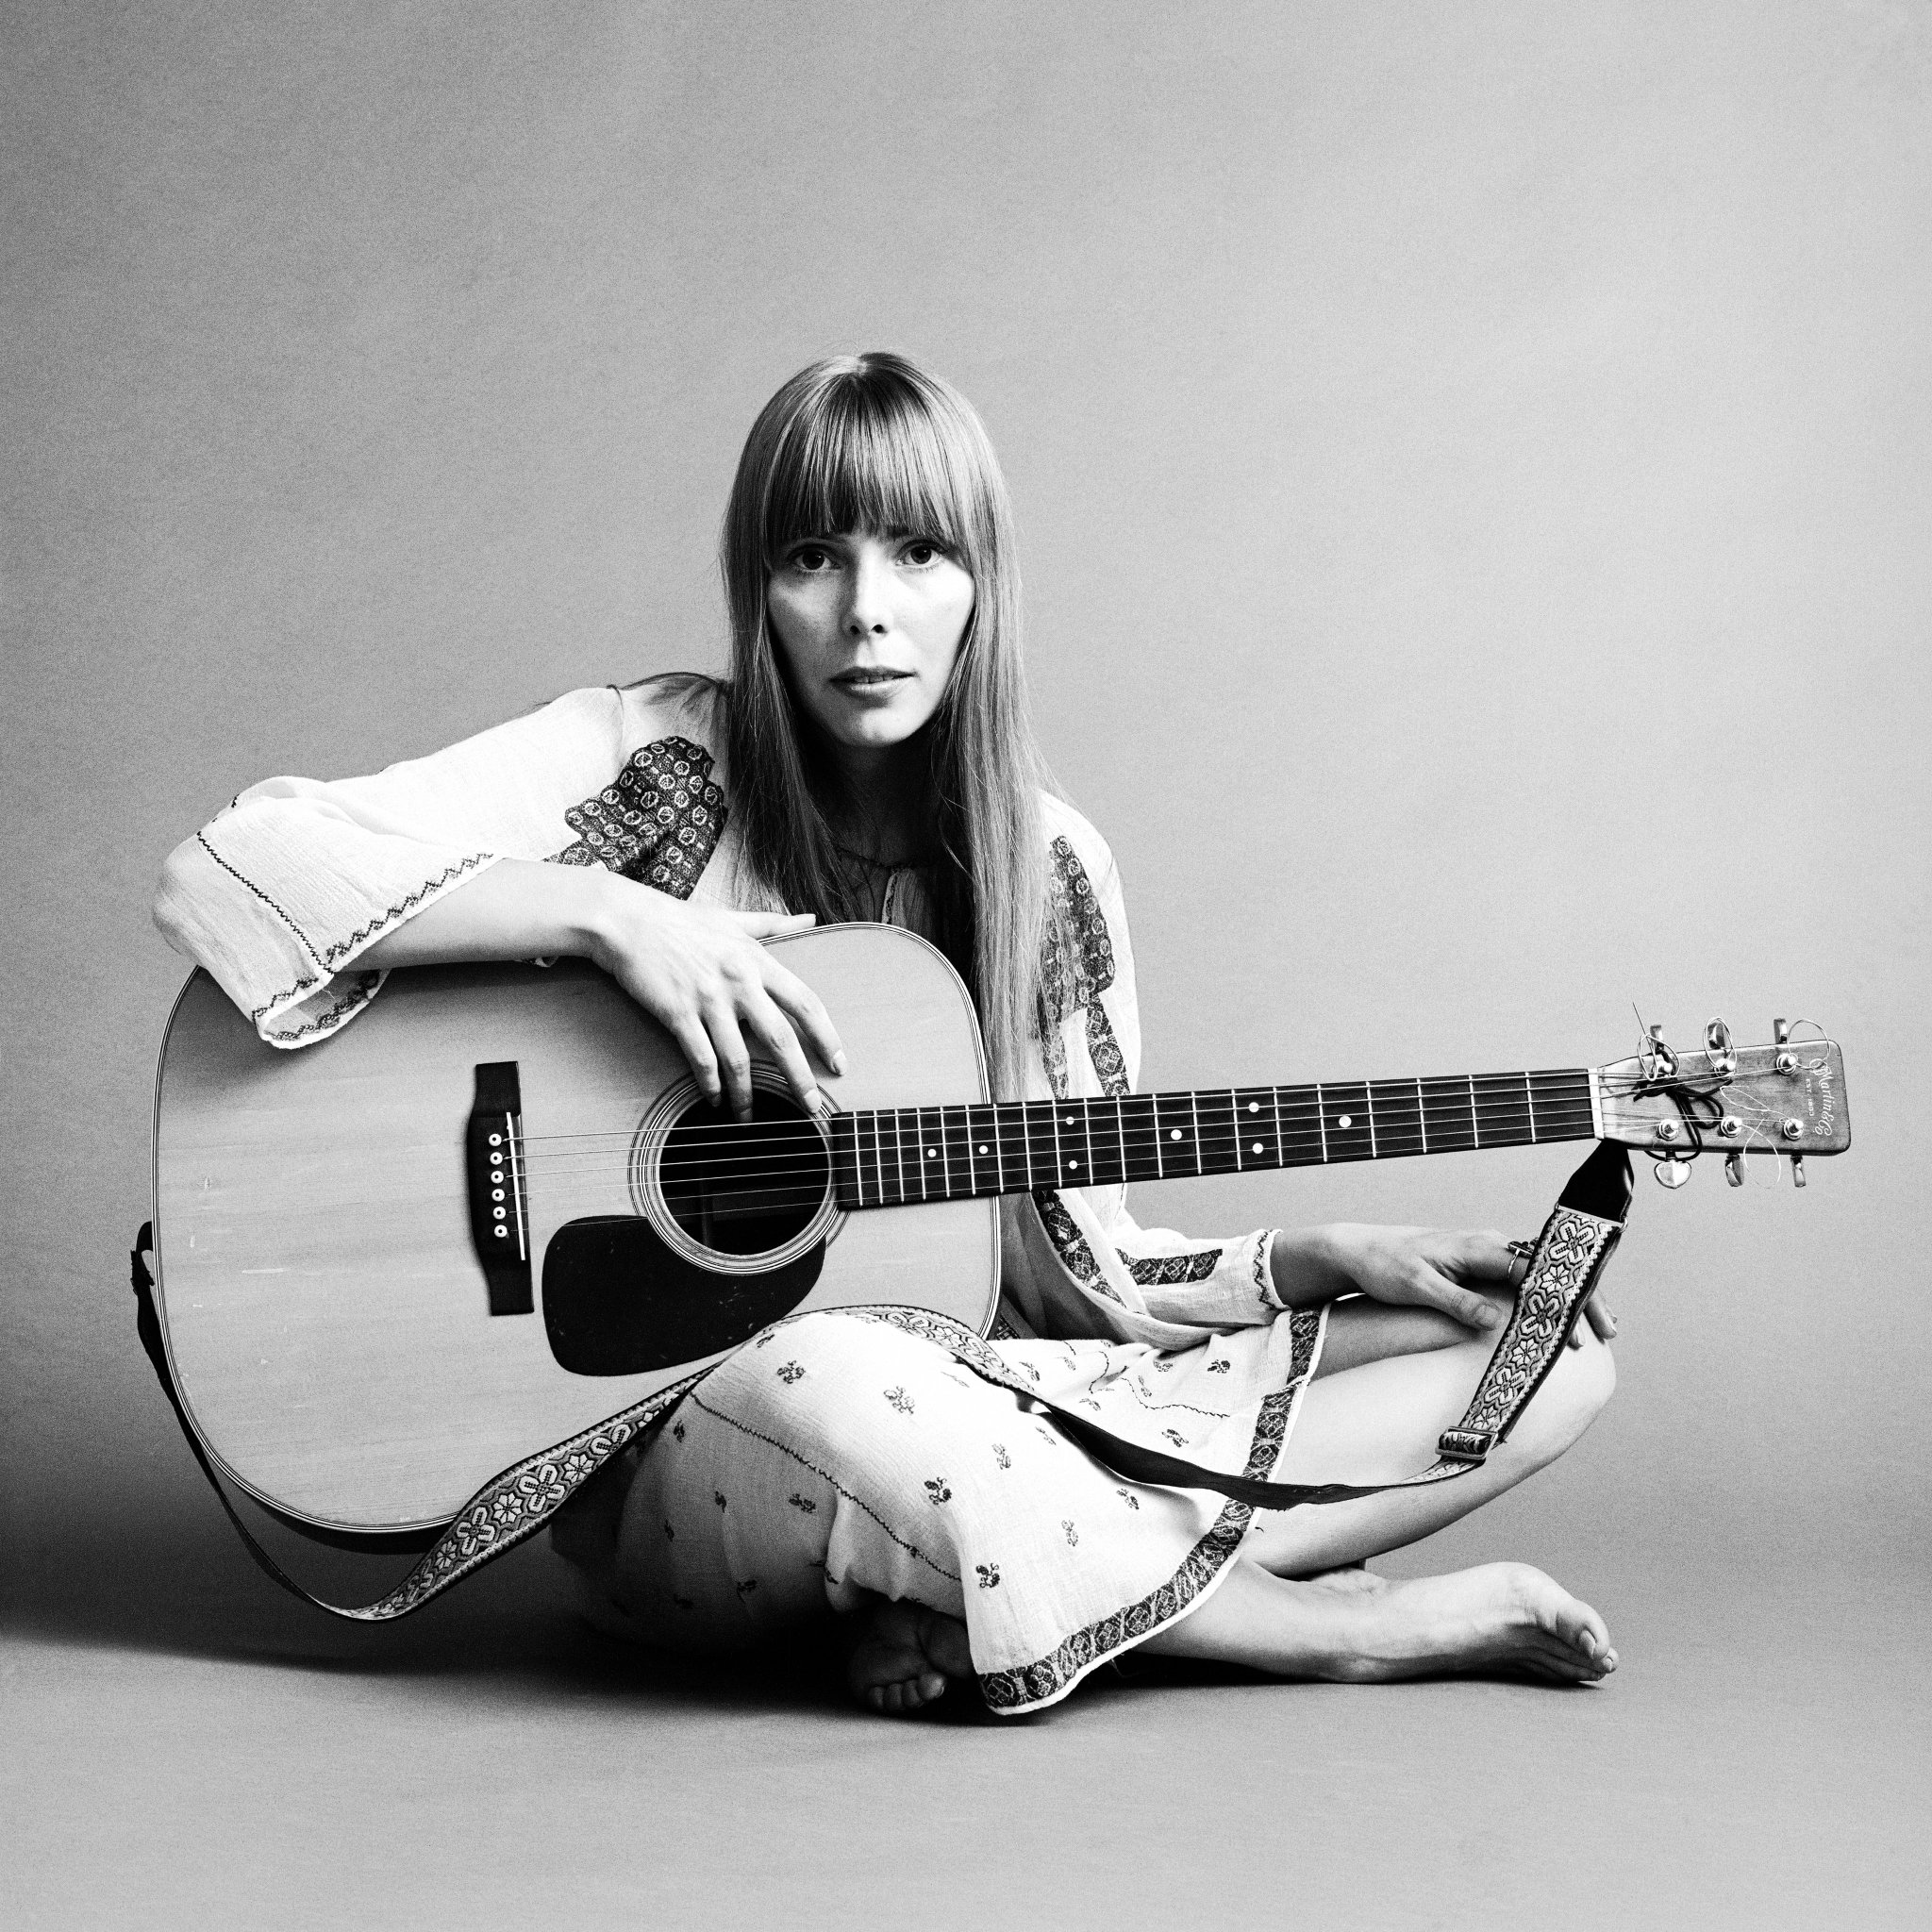 We are stardust
We are golden
And we\ve got to get ourselves
Back to the garden

Happy Birthday Joni Mitchell! 